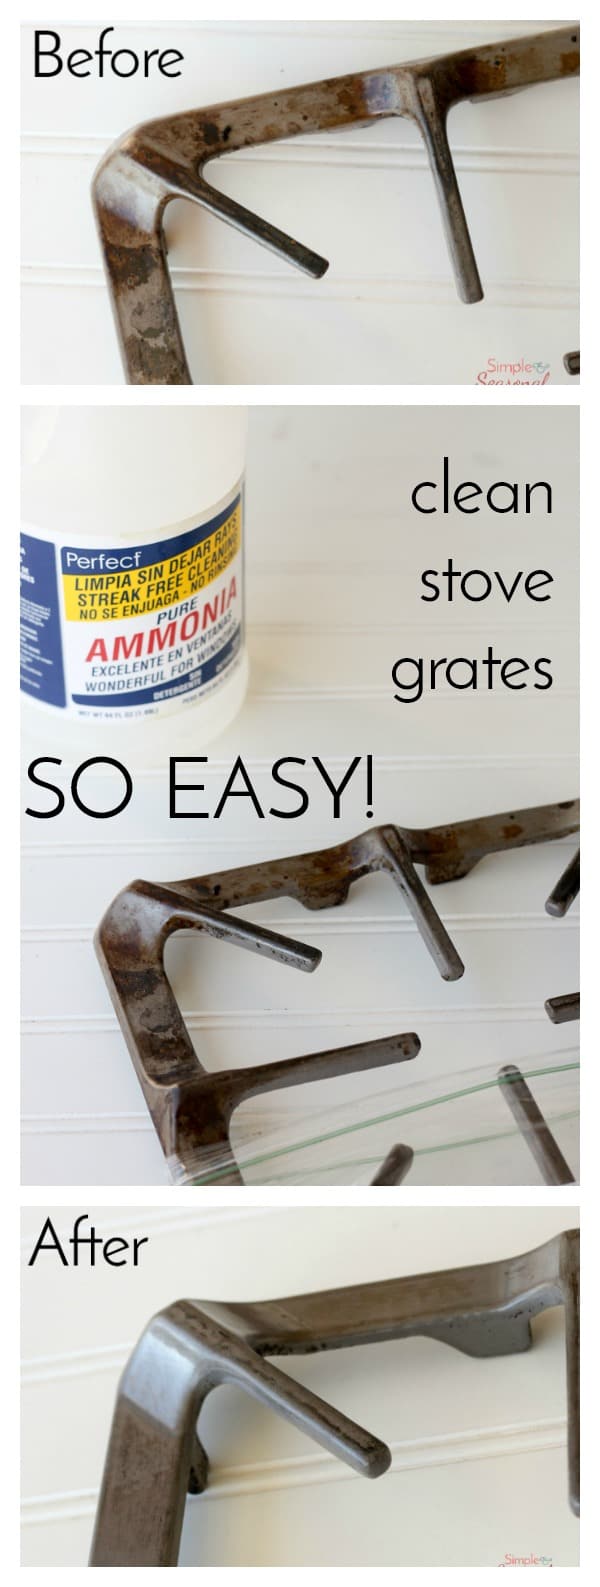 I will never clean my stove the hard way again! This is hands down the EASIEST way to clean stove grates. No more soaking and scrubbing for hours! via @nmburk